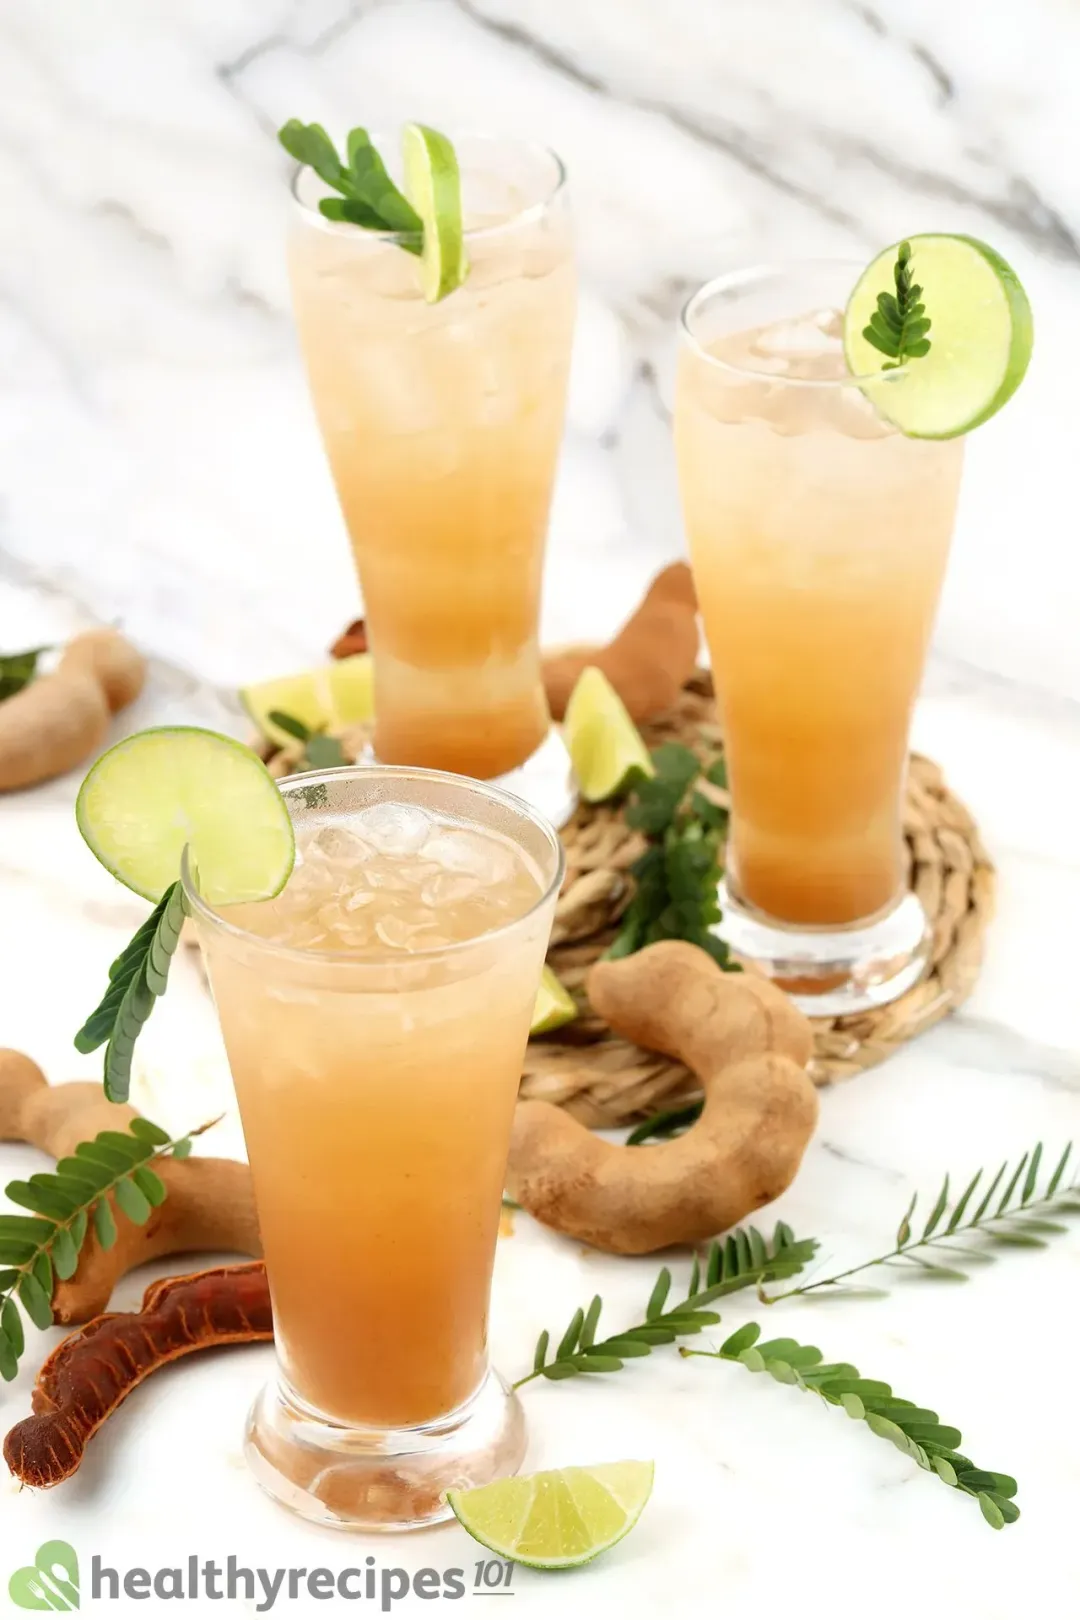 Three glasses of iced tamarind drinks with decorations: lime wheels, peeled tamarinds, and tamarind leaves